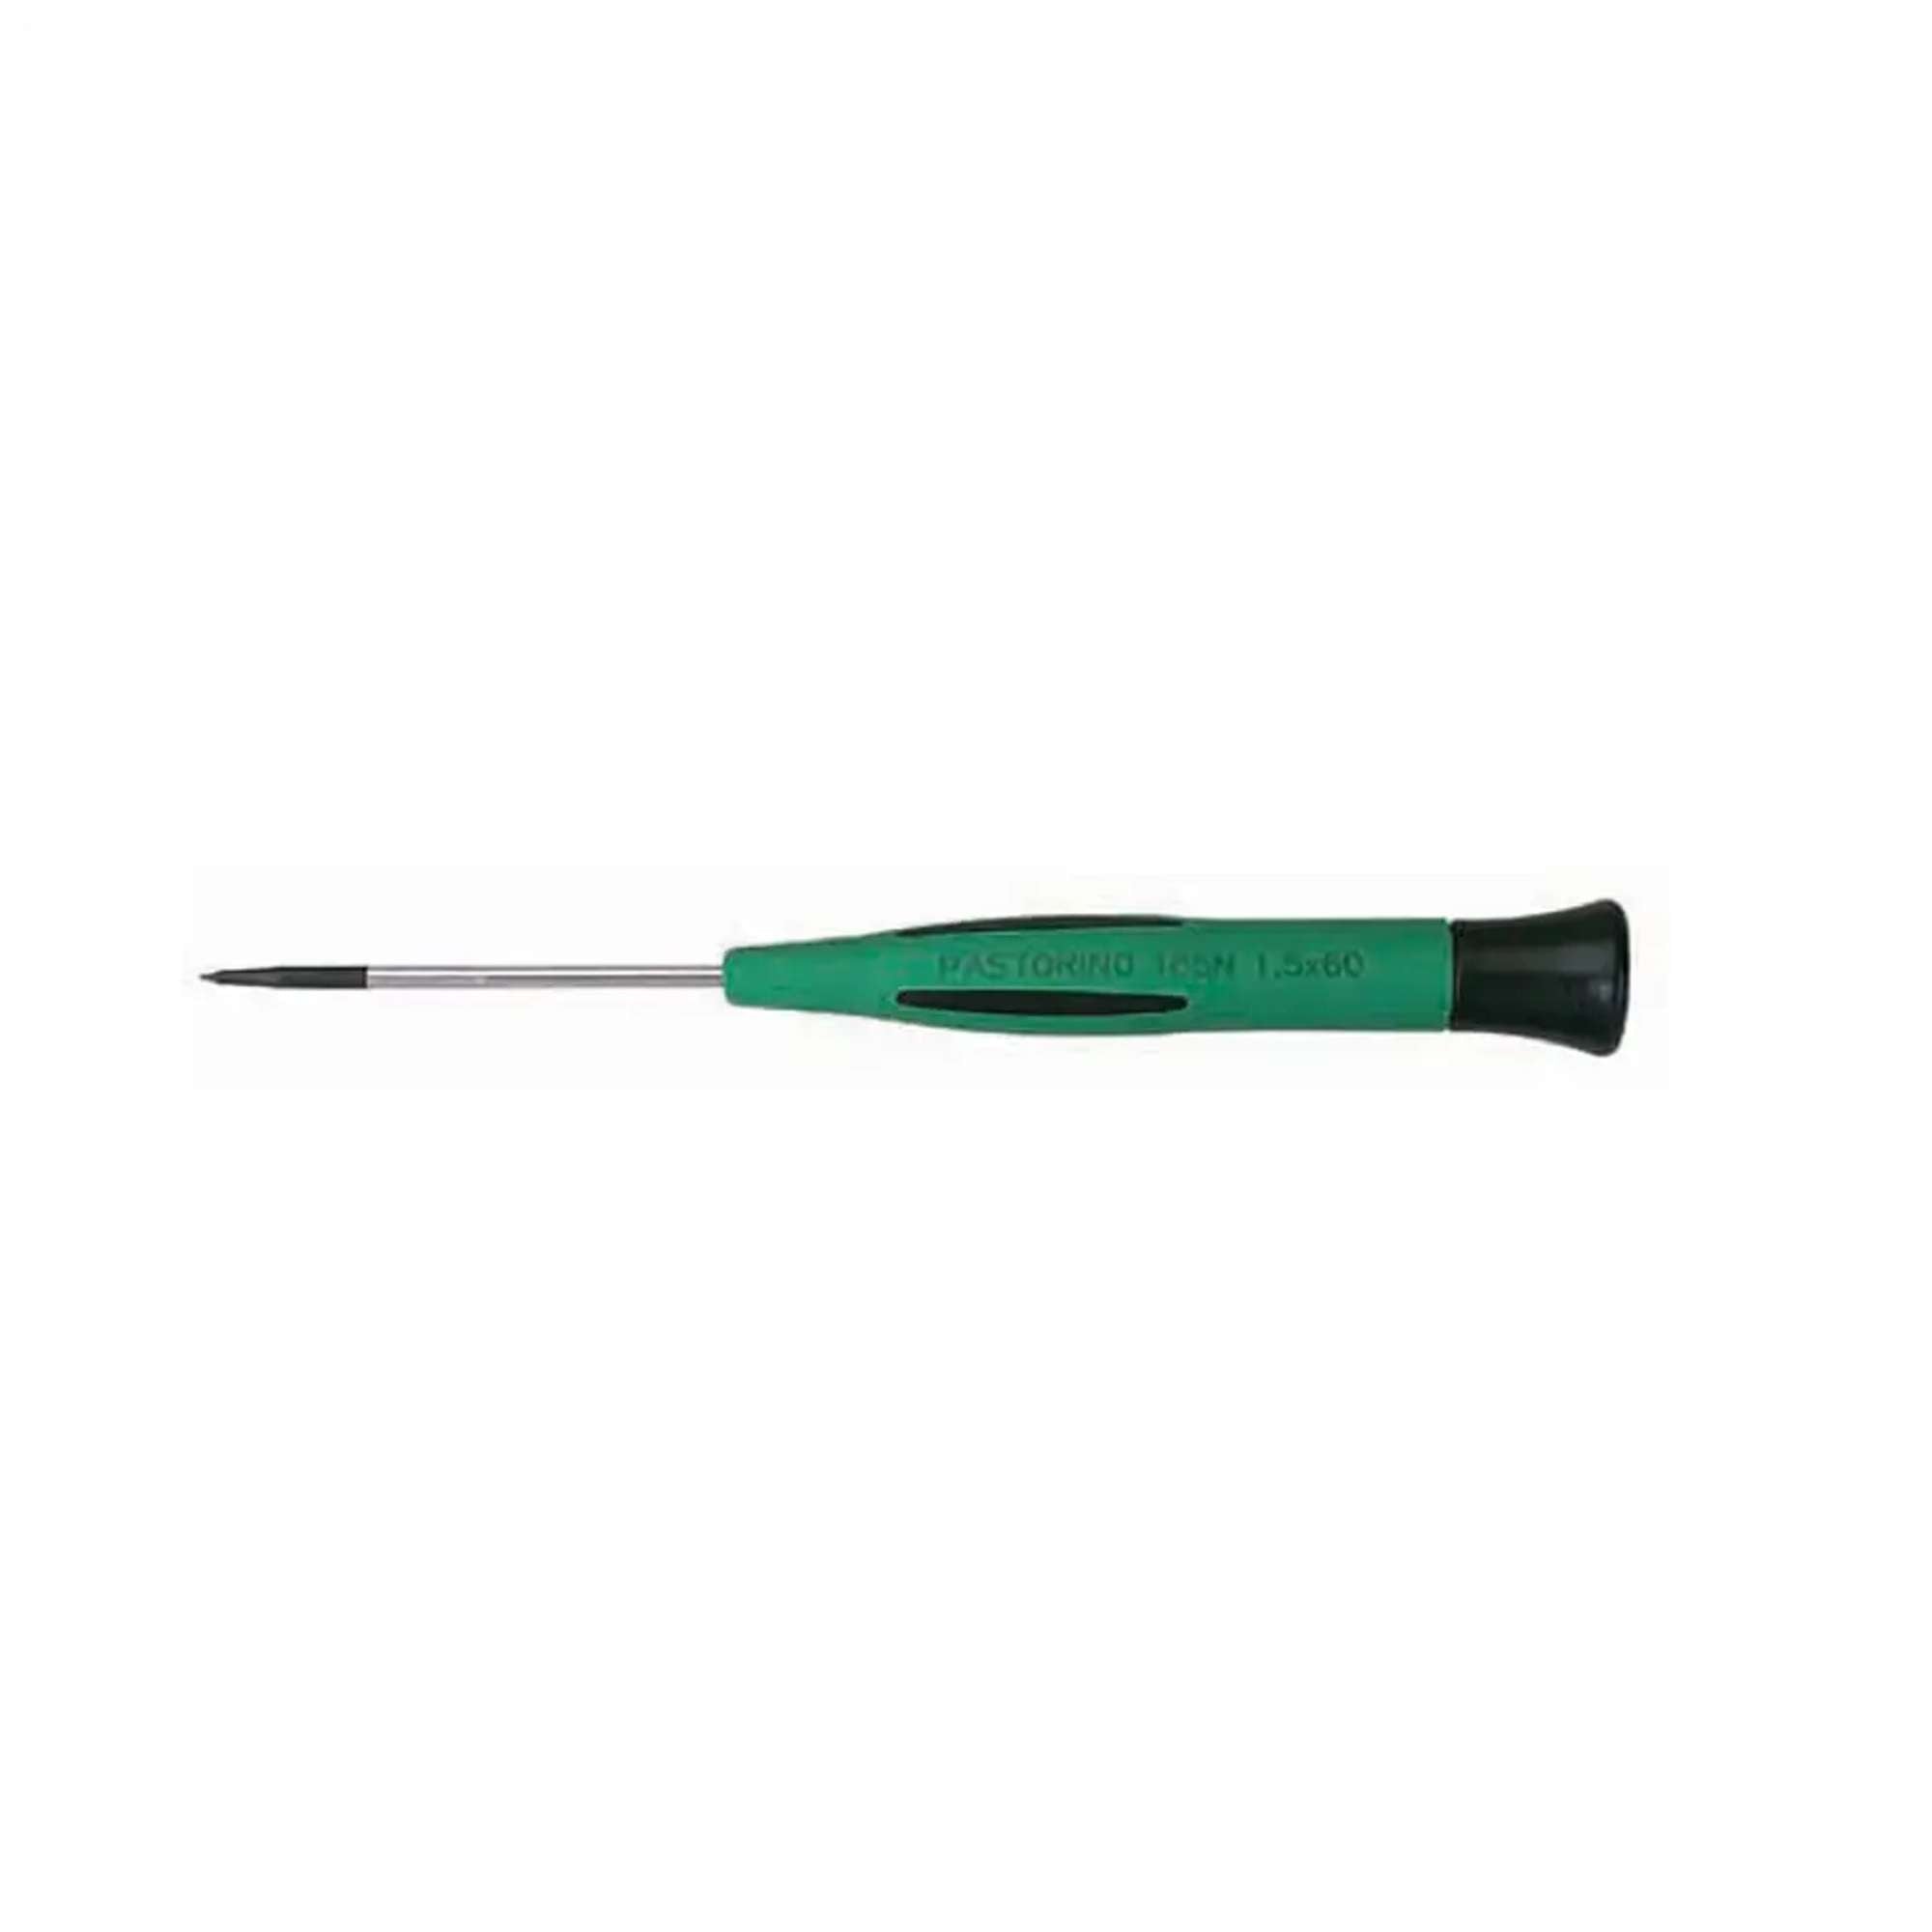 Screwdriver with flat carving - Pastorino - 185N(0002-0004)